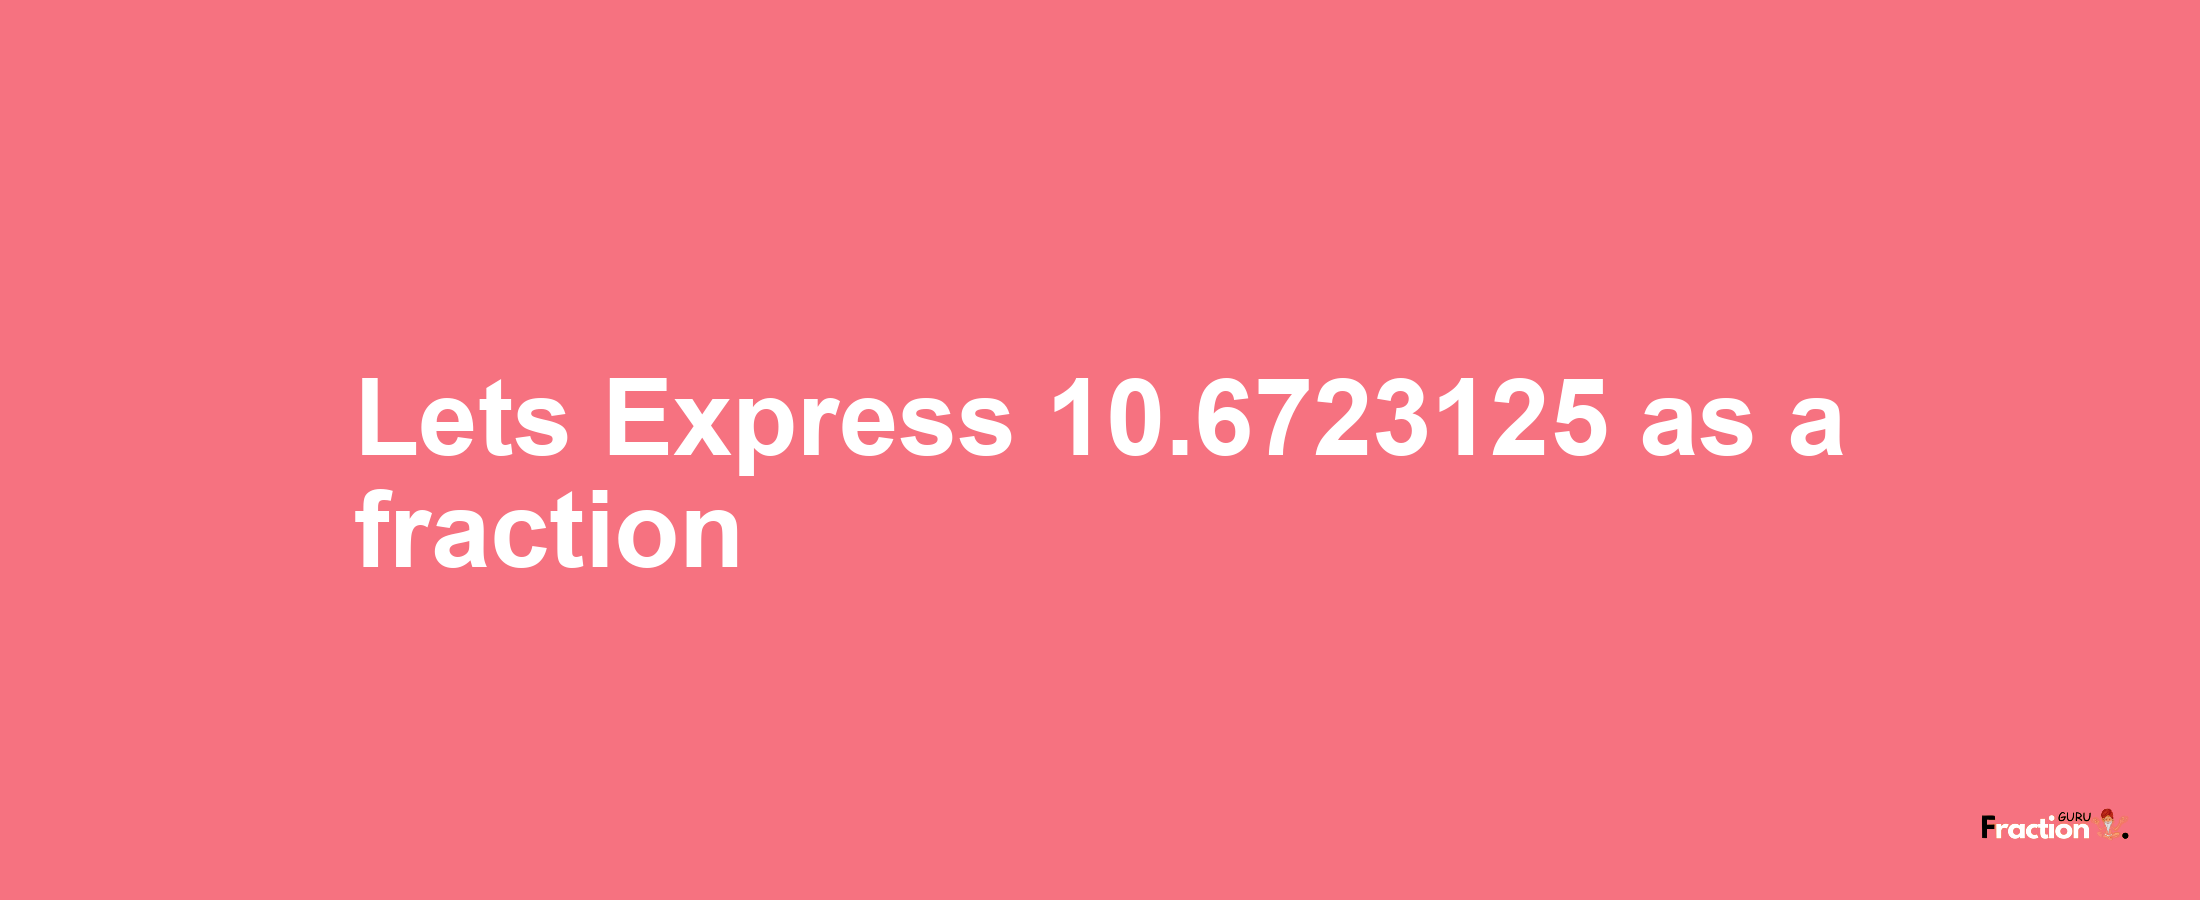 Lets Express 10.6723125 as afraction